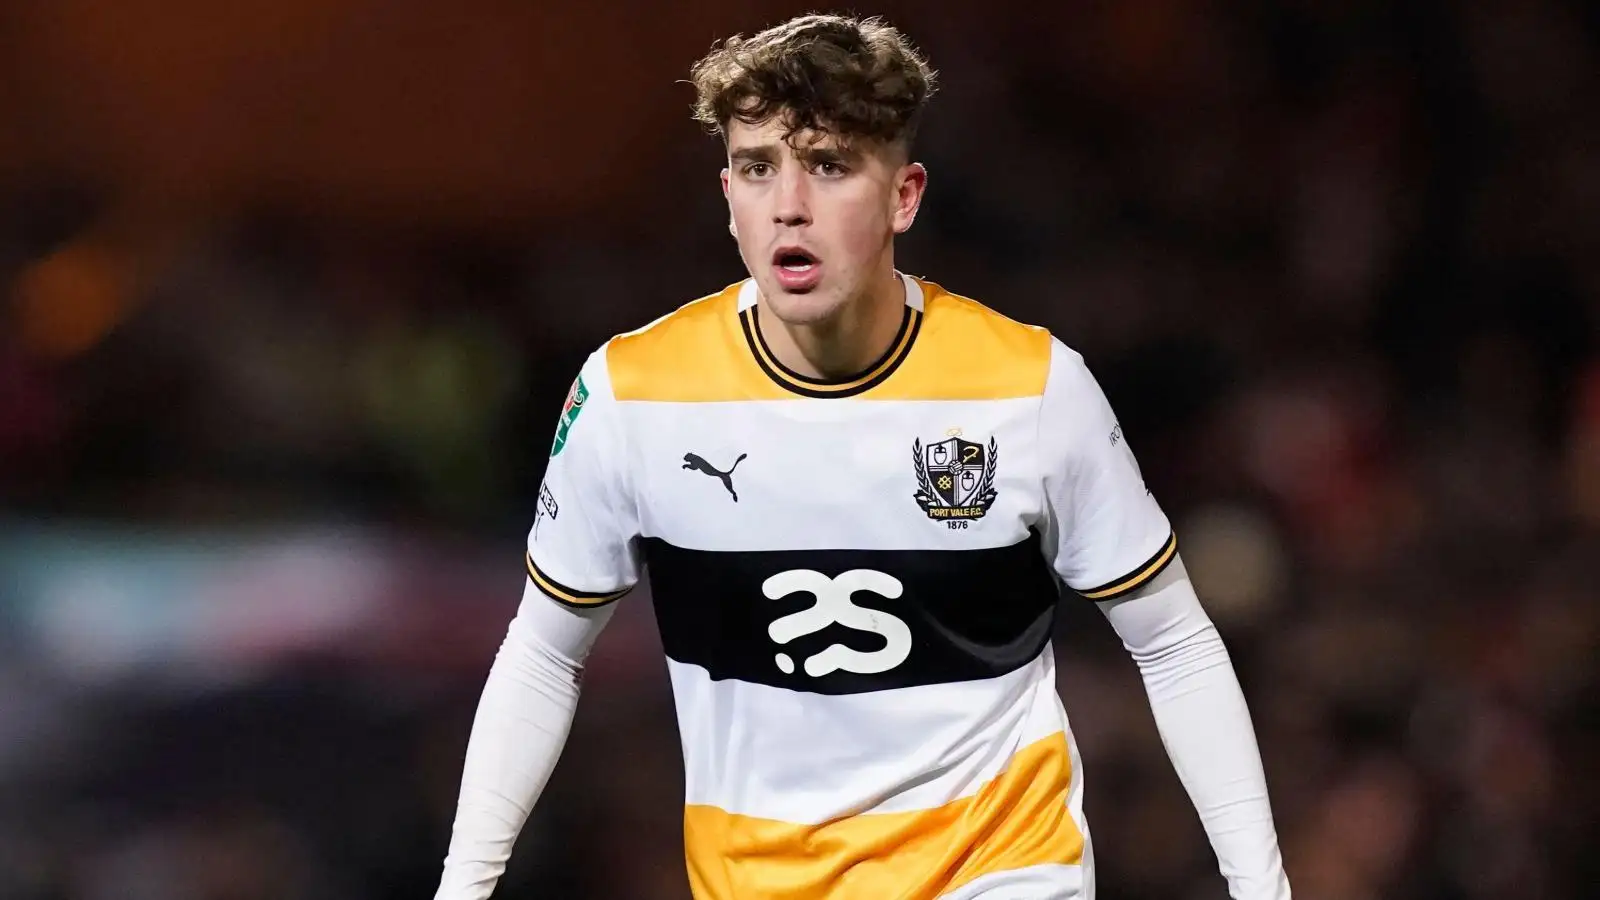 Sheffield United midfielder Oliver Arblaster during loan with Port Vale